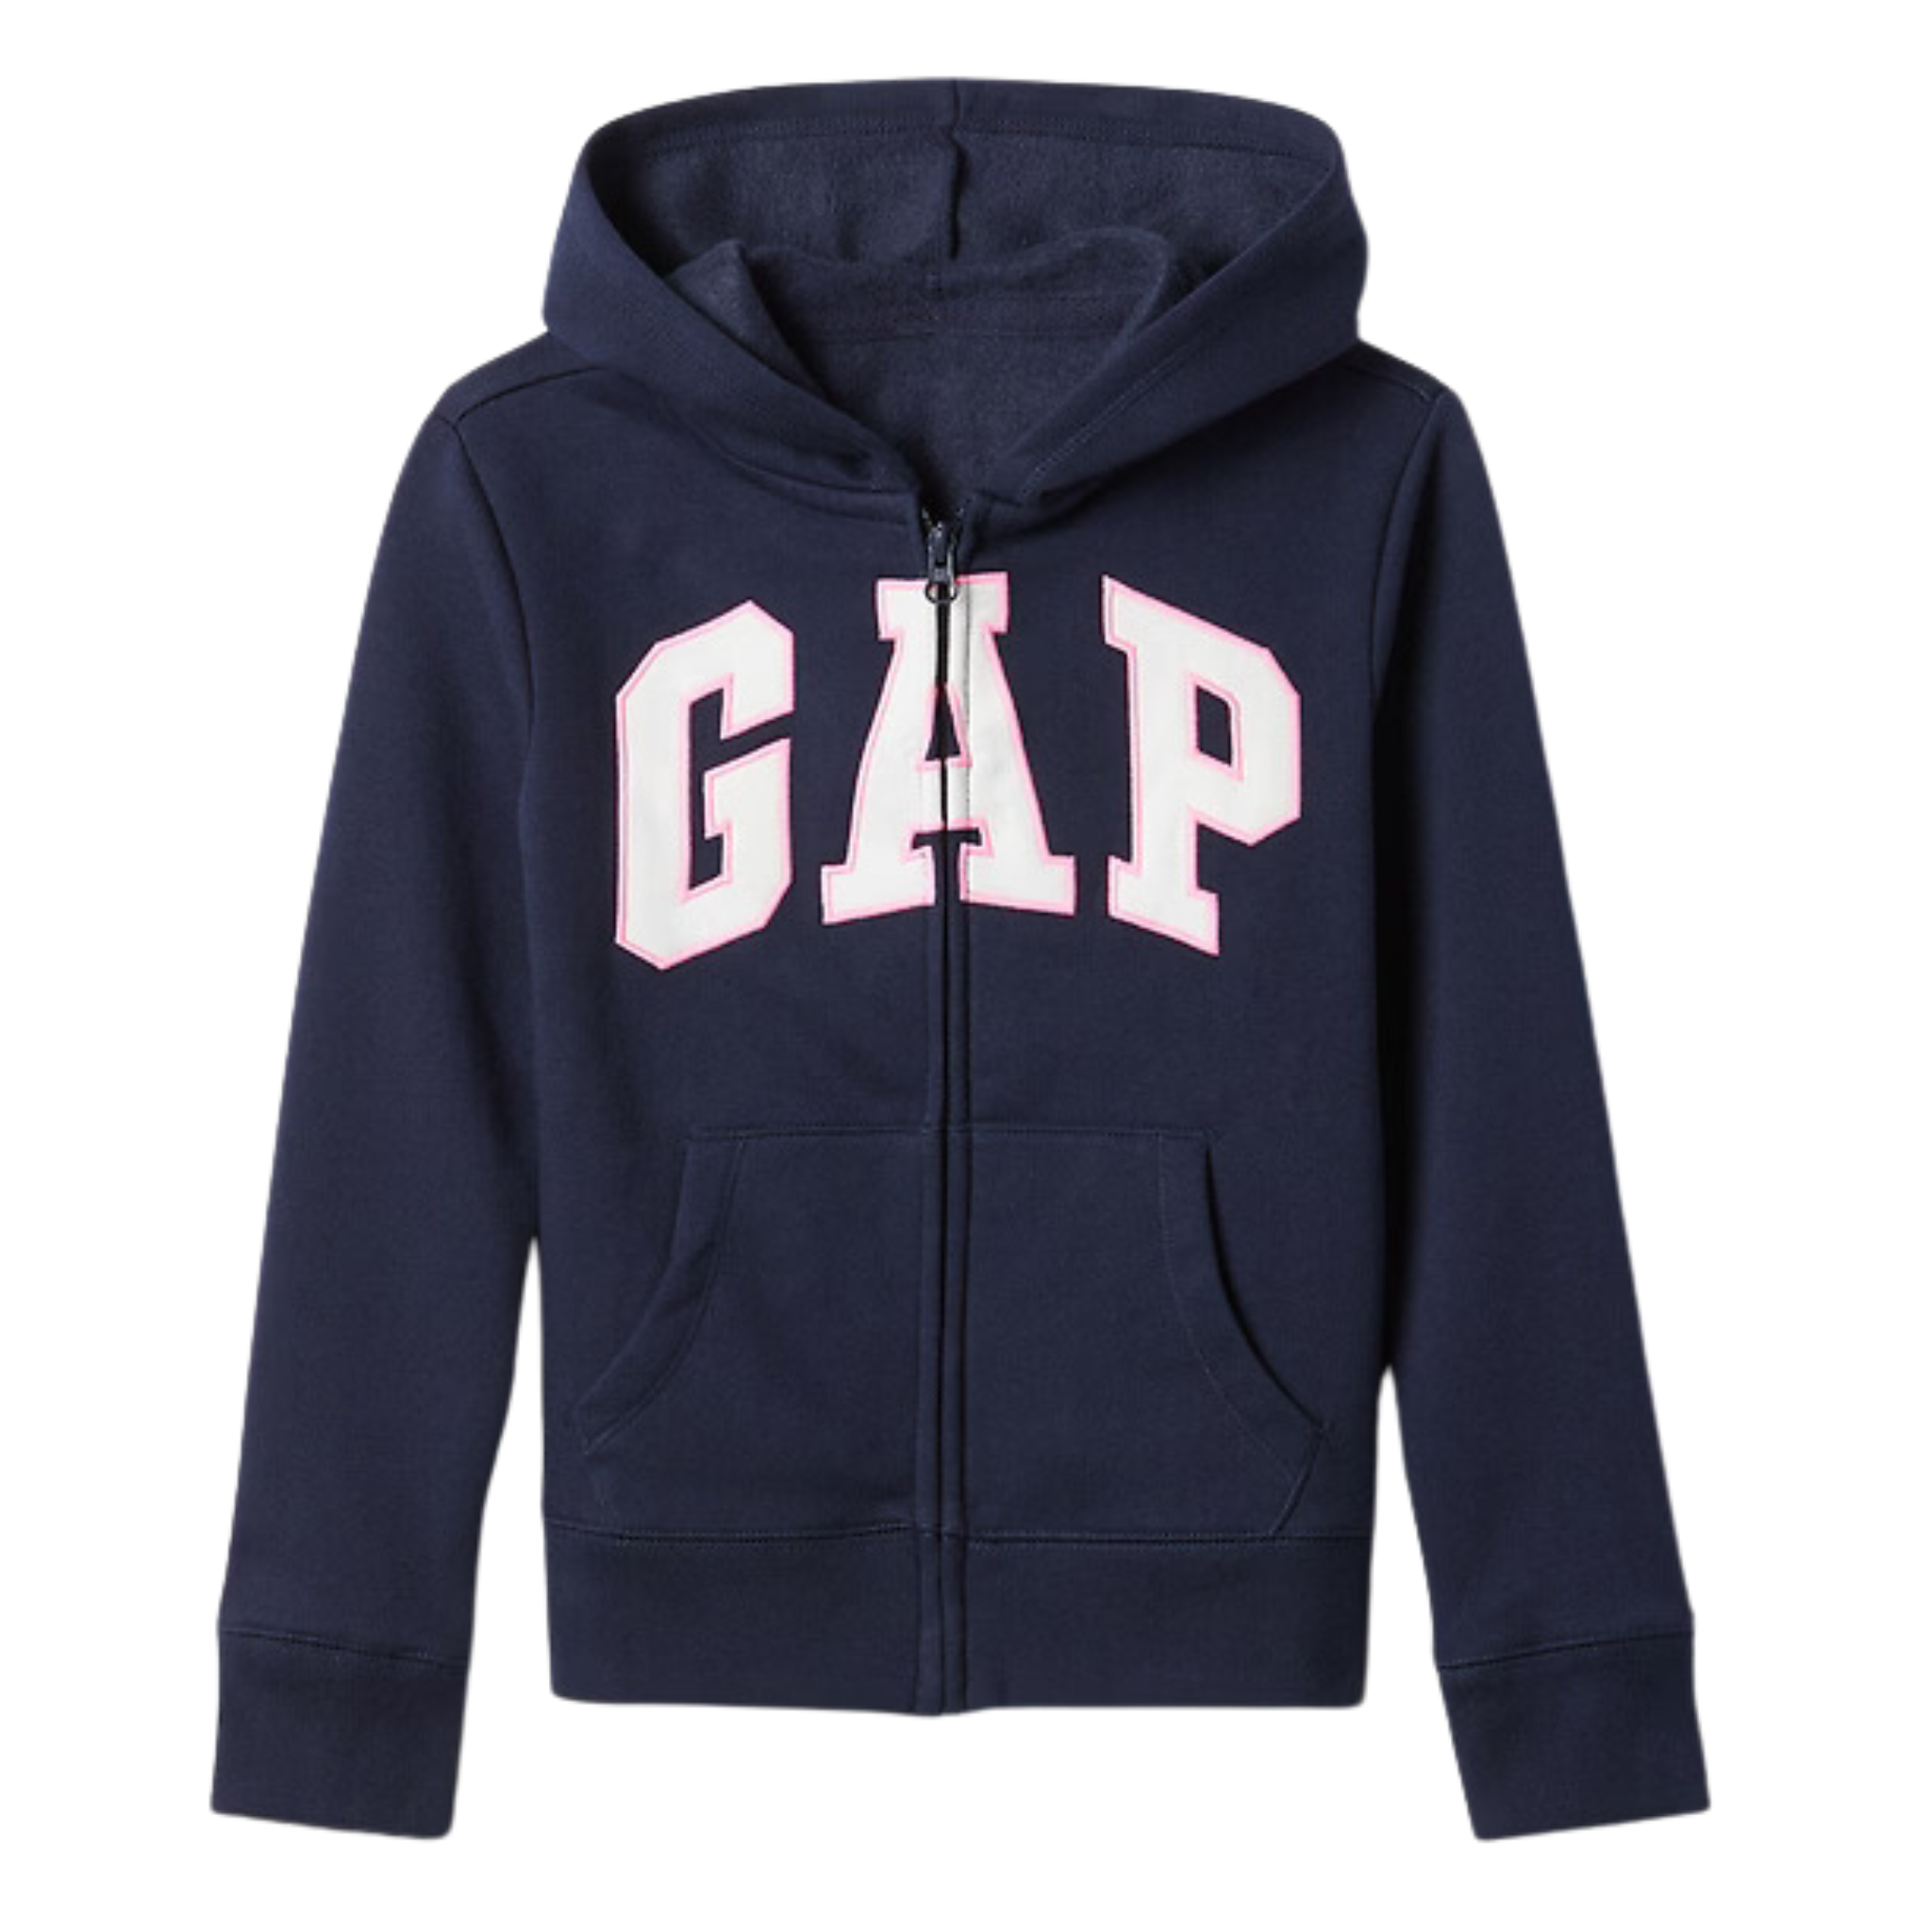 Up To 80% Off At Gap Factory